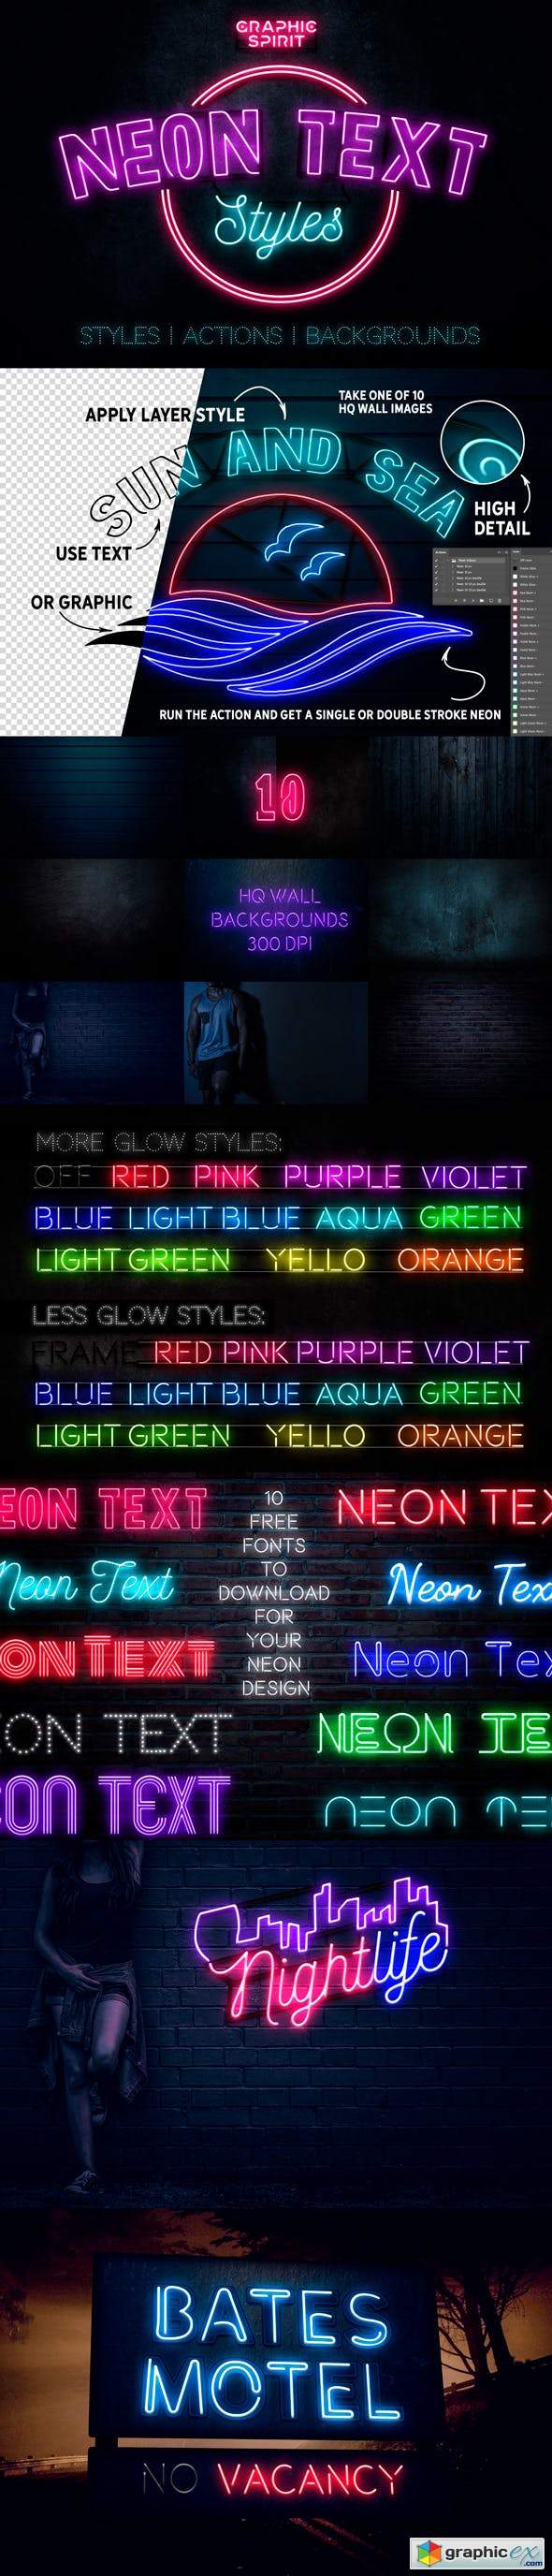 Neon Text Layer Styles & Extras 23426935